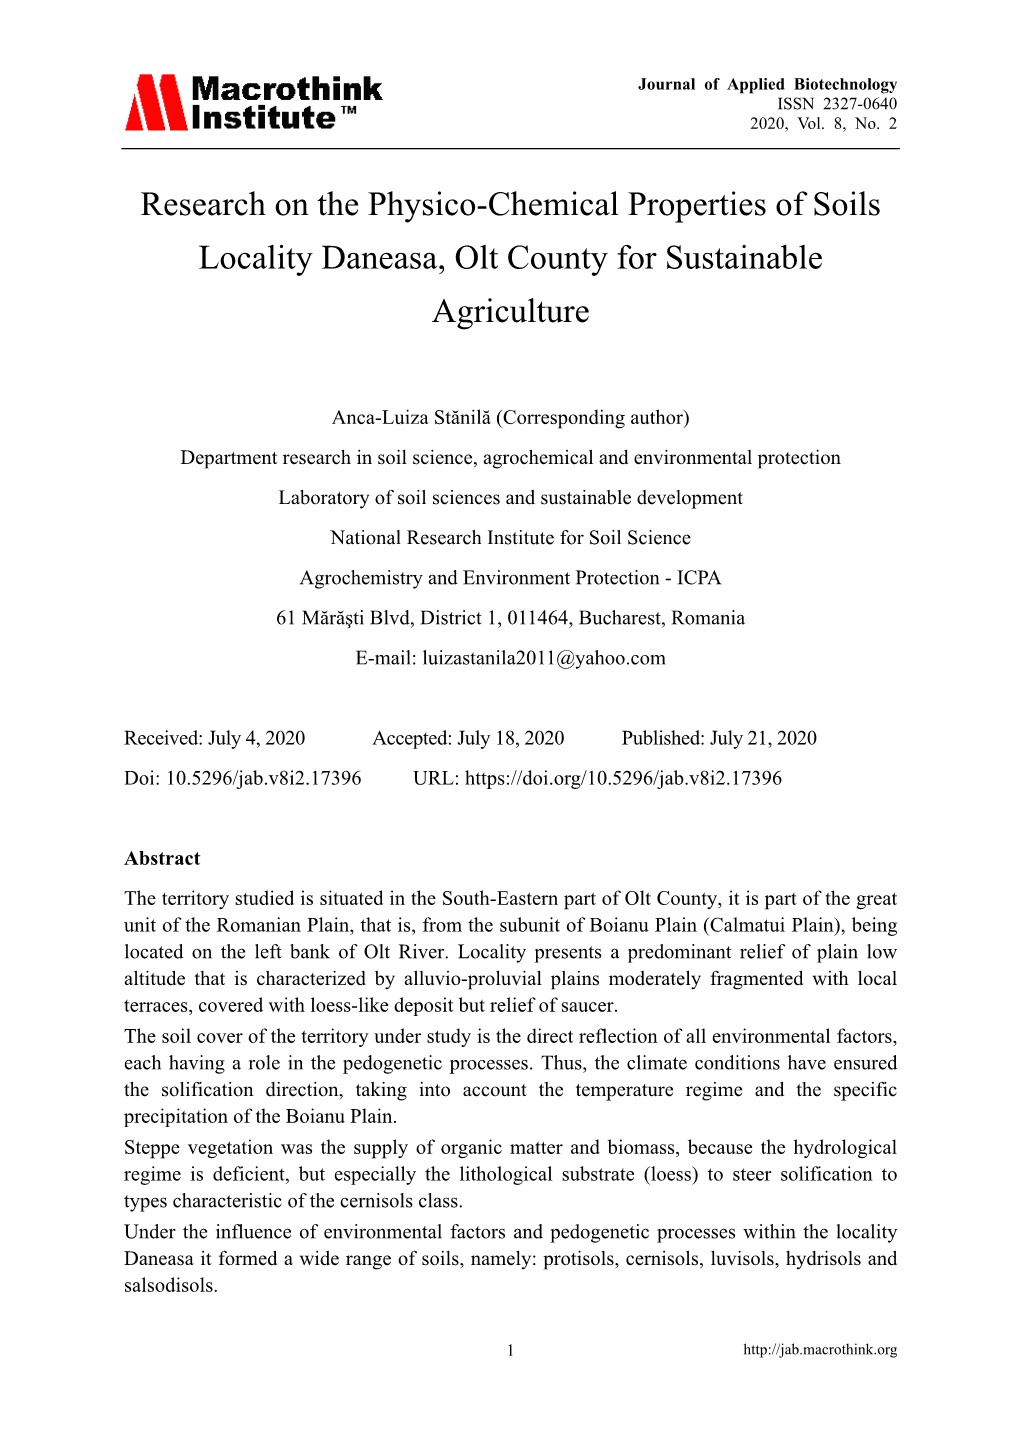 Research on the Physico-Chemical Properties of Soils Locality Daneasa, Olt County for Sustainable Agriculture